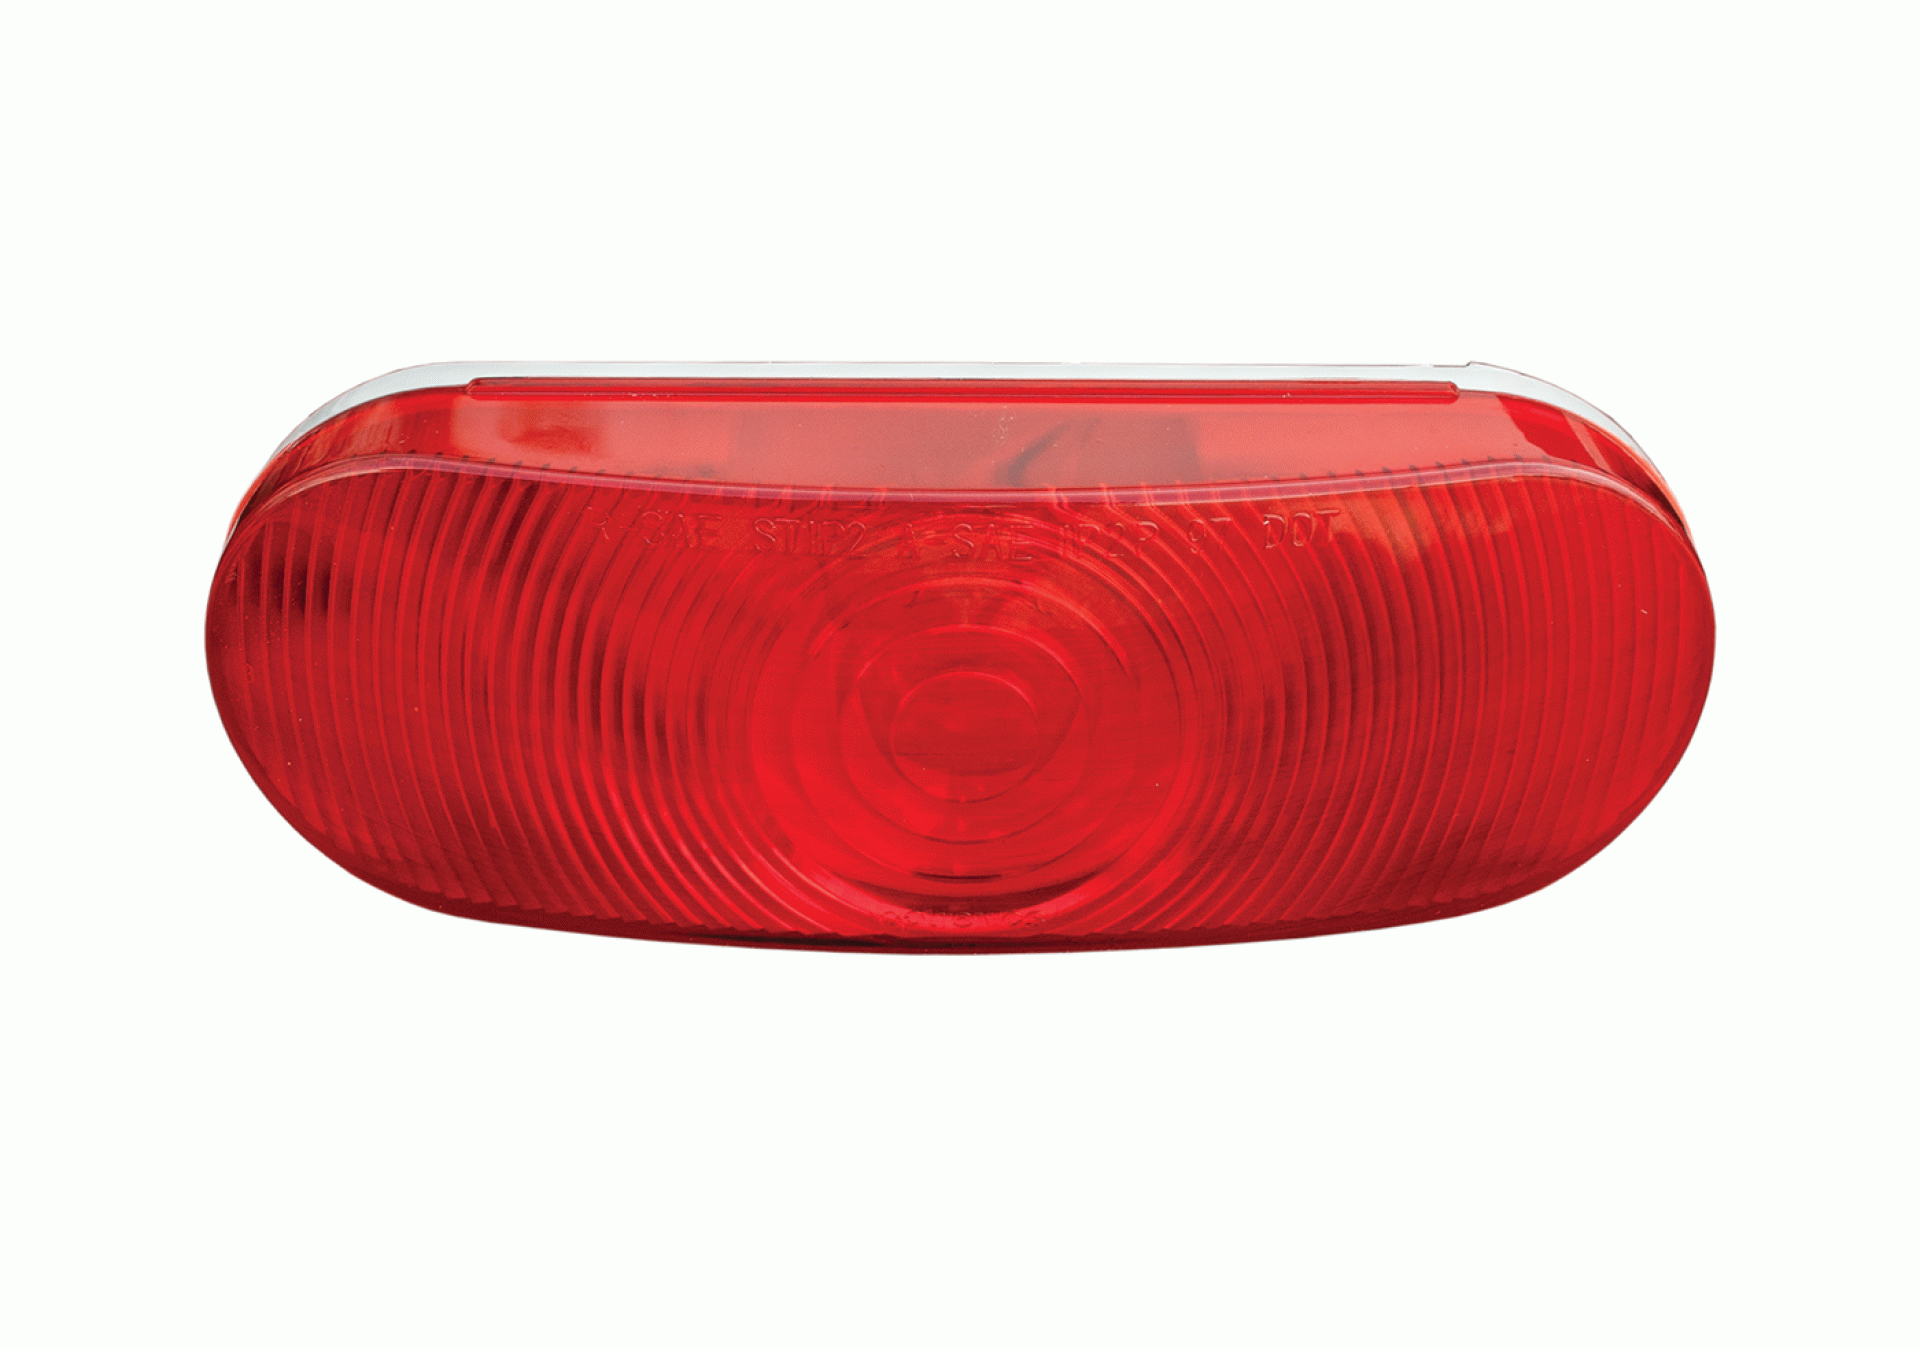 OPTRONICS INTERNATIONAL LLC | ST70RS | OVAL SUBMERSIBLE TAIL LIGHT 6" RED REPLACEMENT